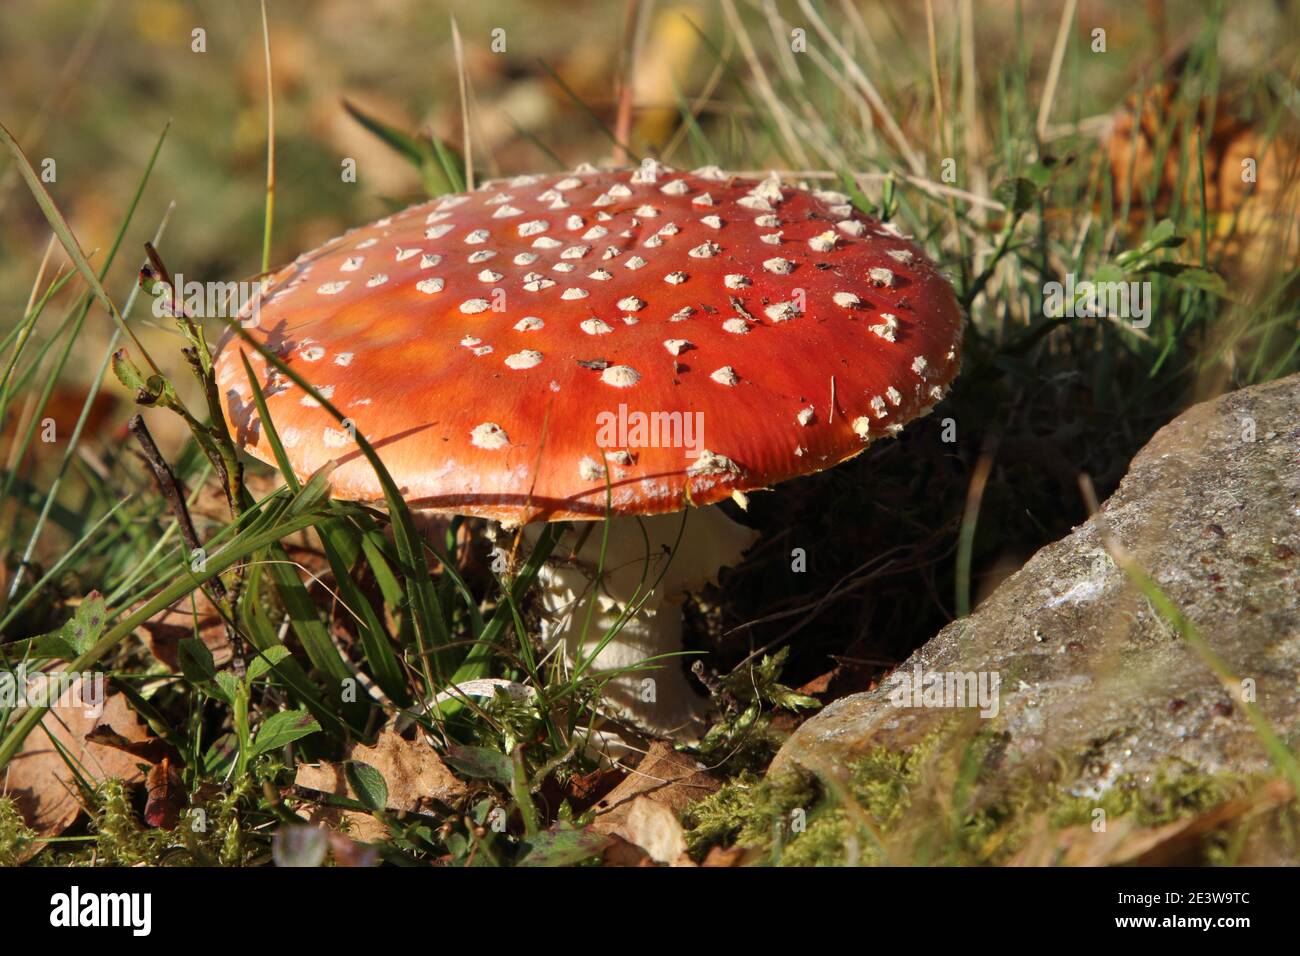 Amanita muscaria, commonly known as fly agaric a red cap poison mushroom, so non edible, causing hallucinations plus attracts and kills flies. Stock Photo